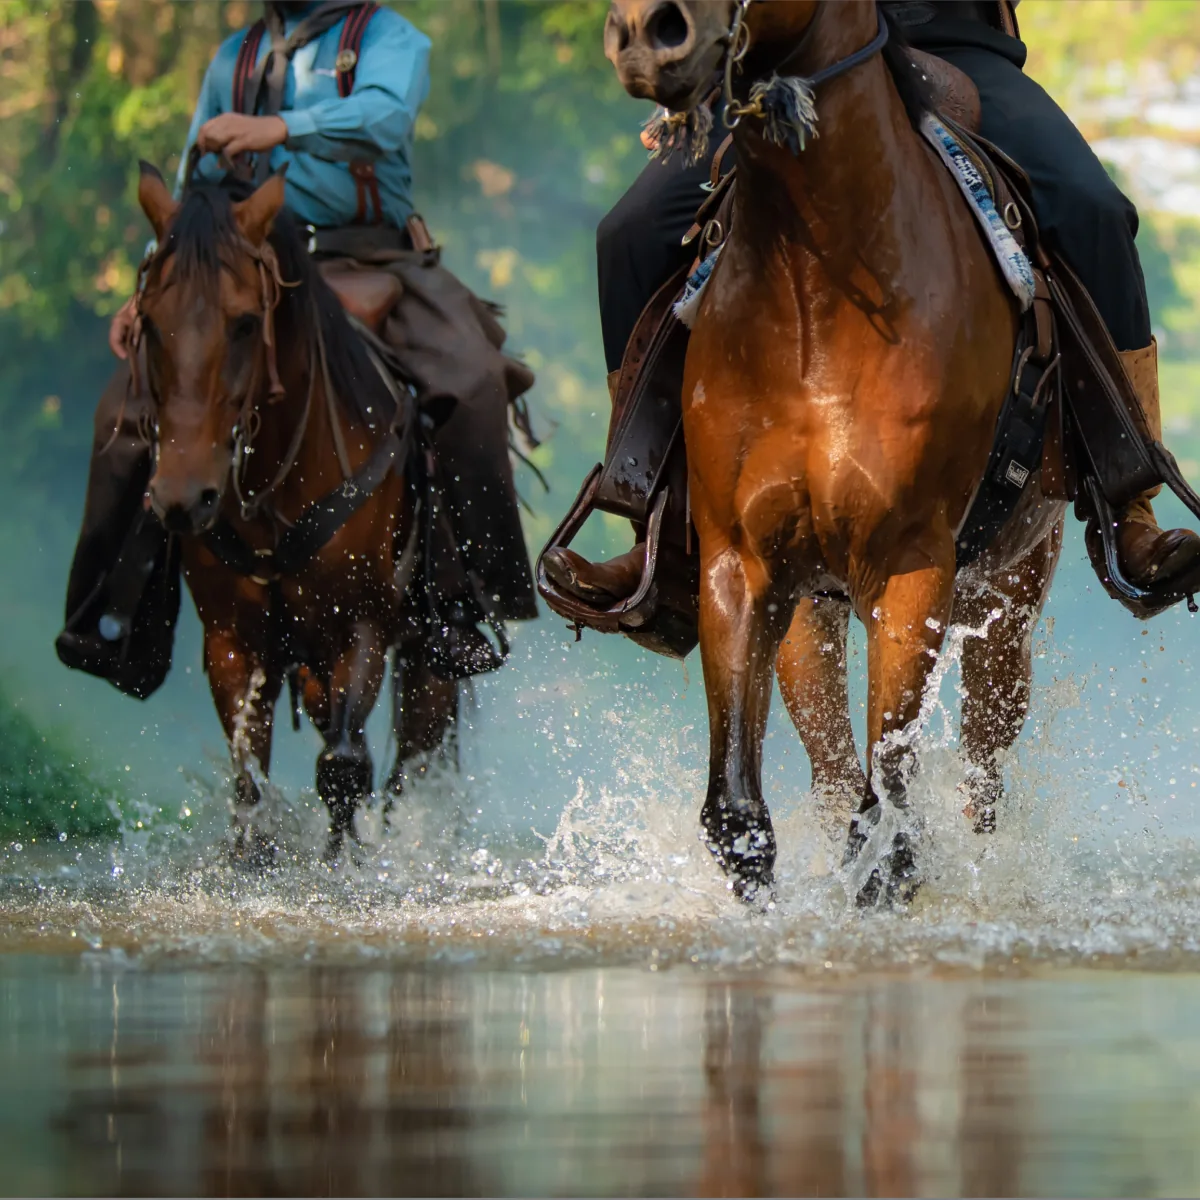 Two people riding on horses through a river.